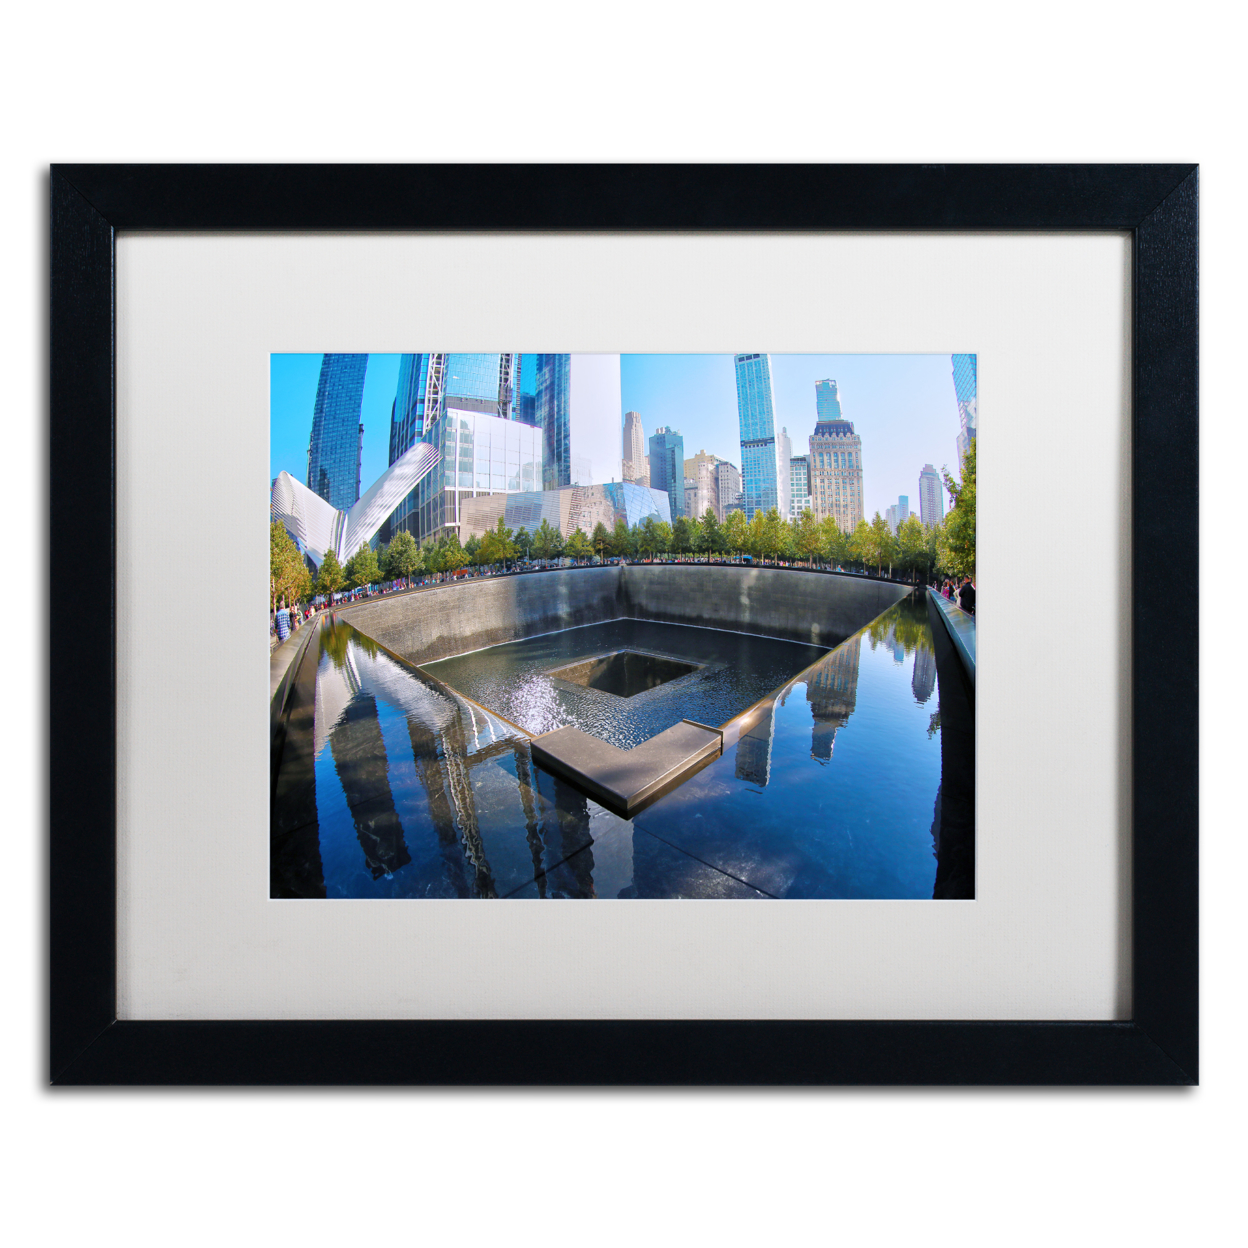 CATeyes '911 Memorial' Black Wooden Framed Art 18 X 22 Inches